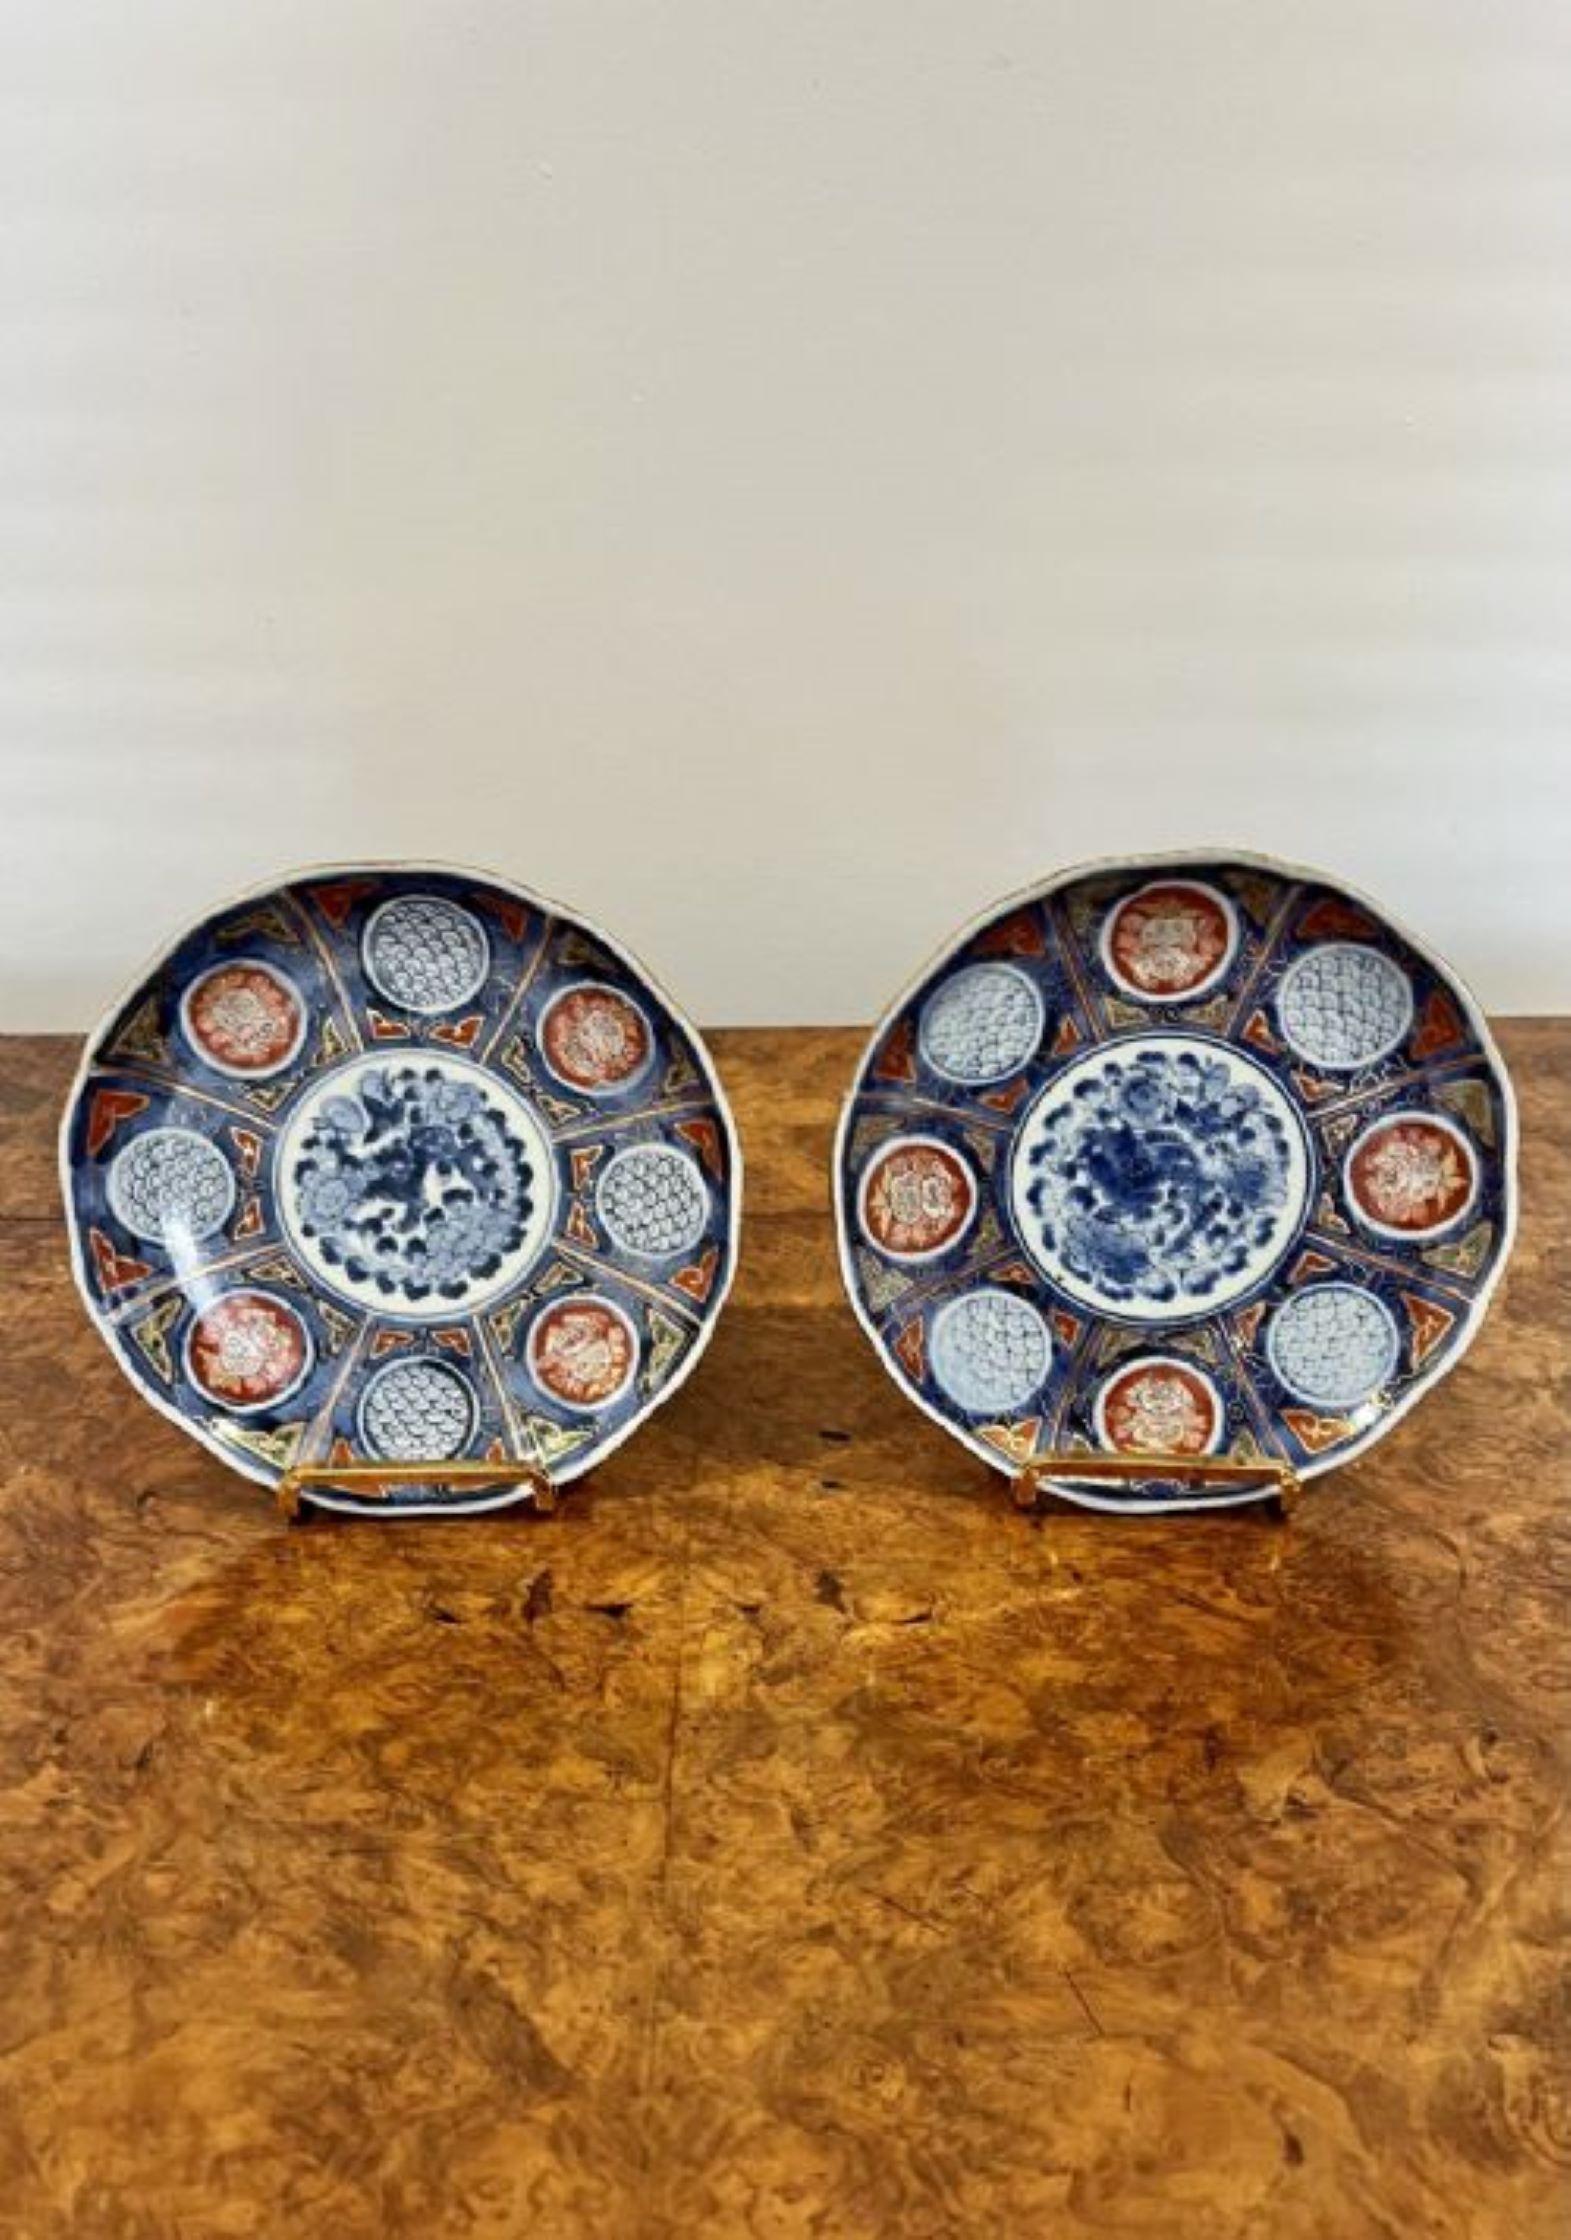 Pair of antique Japanese quality imari plates with unusual hand painted decoration in blue, red, white, green and gold colours 